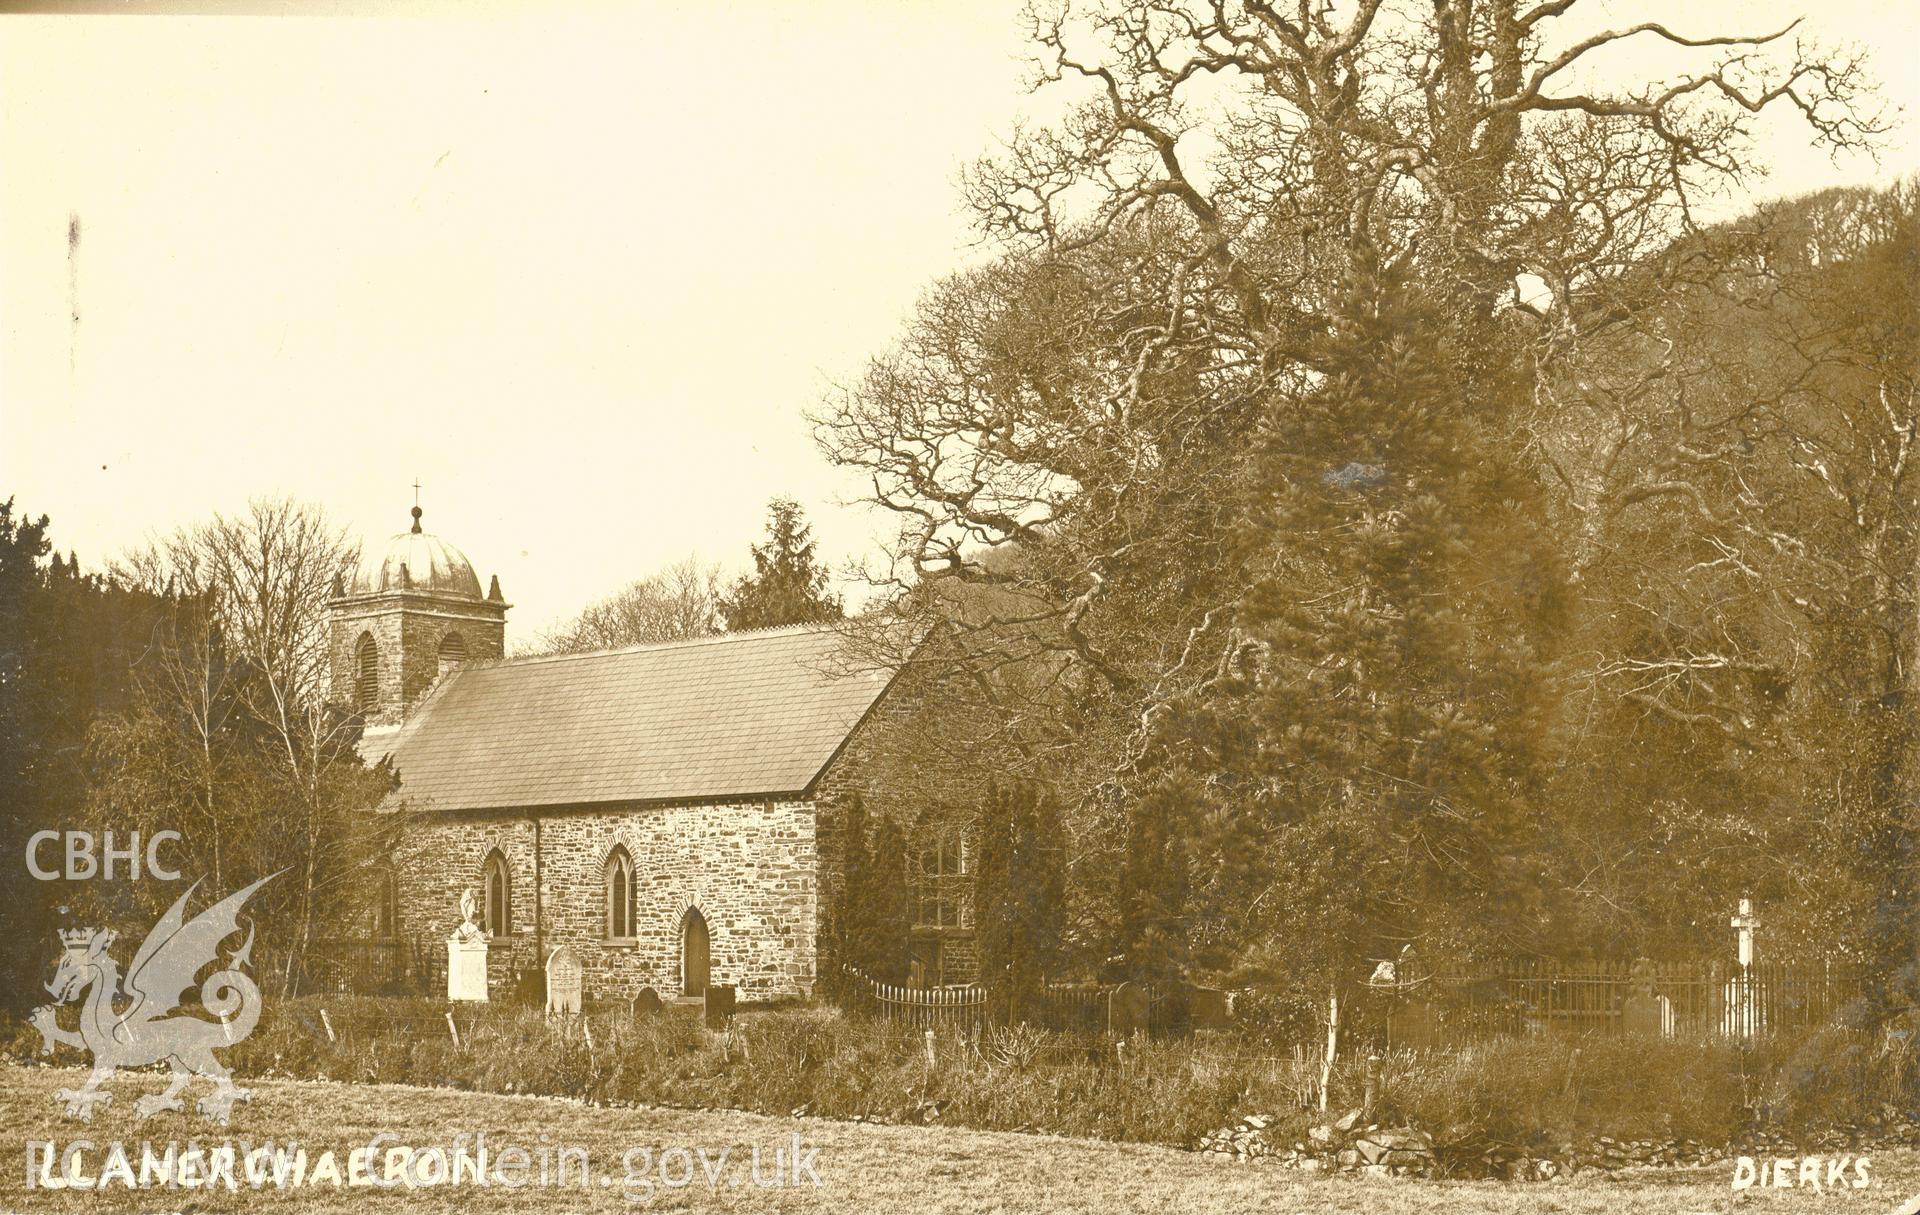 Digitised postcard image of St Non's, Llanerchaeron, C.H. Dierks, Aberayron. Produced by Parks and Gardens Data Services, from an original item in the Peter Davis Collection at Parks and Gardens UK. We hold only web-resolution images of this collection, suitable for viewing on screen and for research purposes only. We do not hold the original images, or publication quality scans.